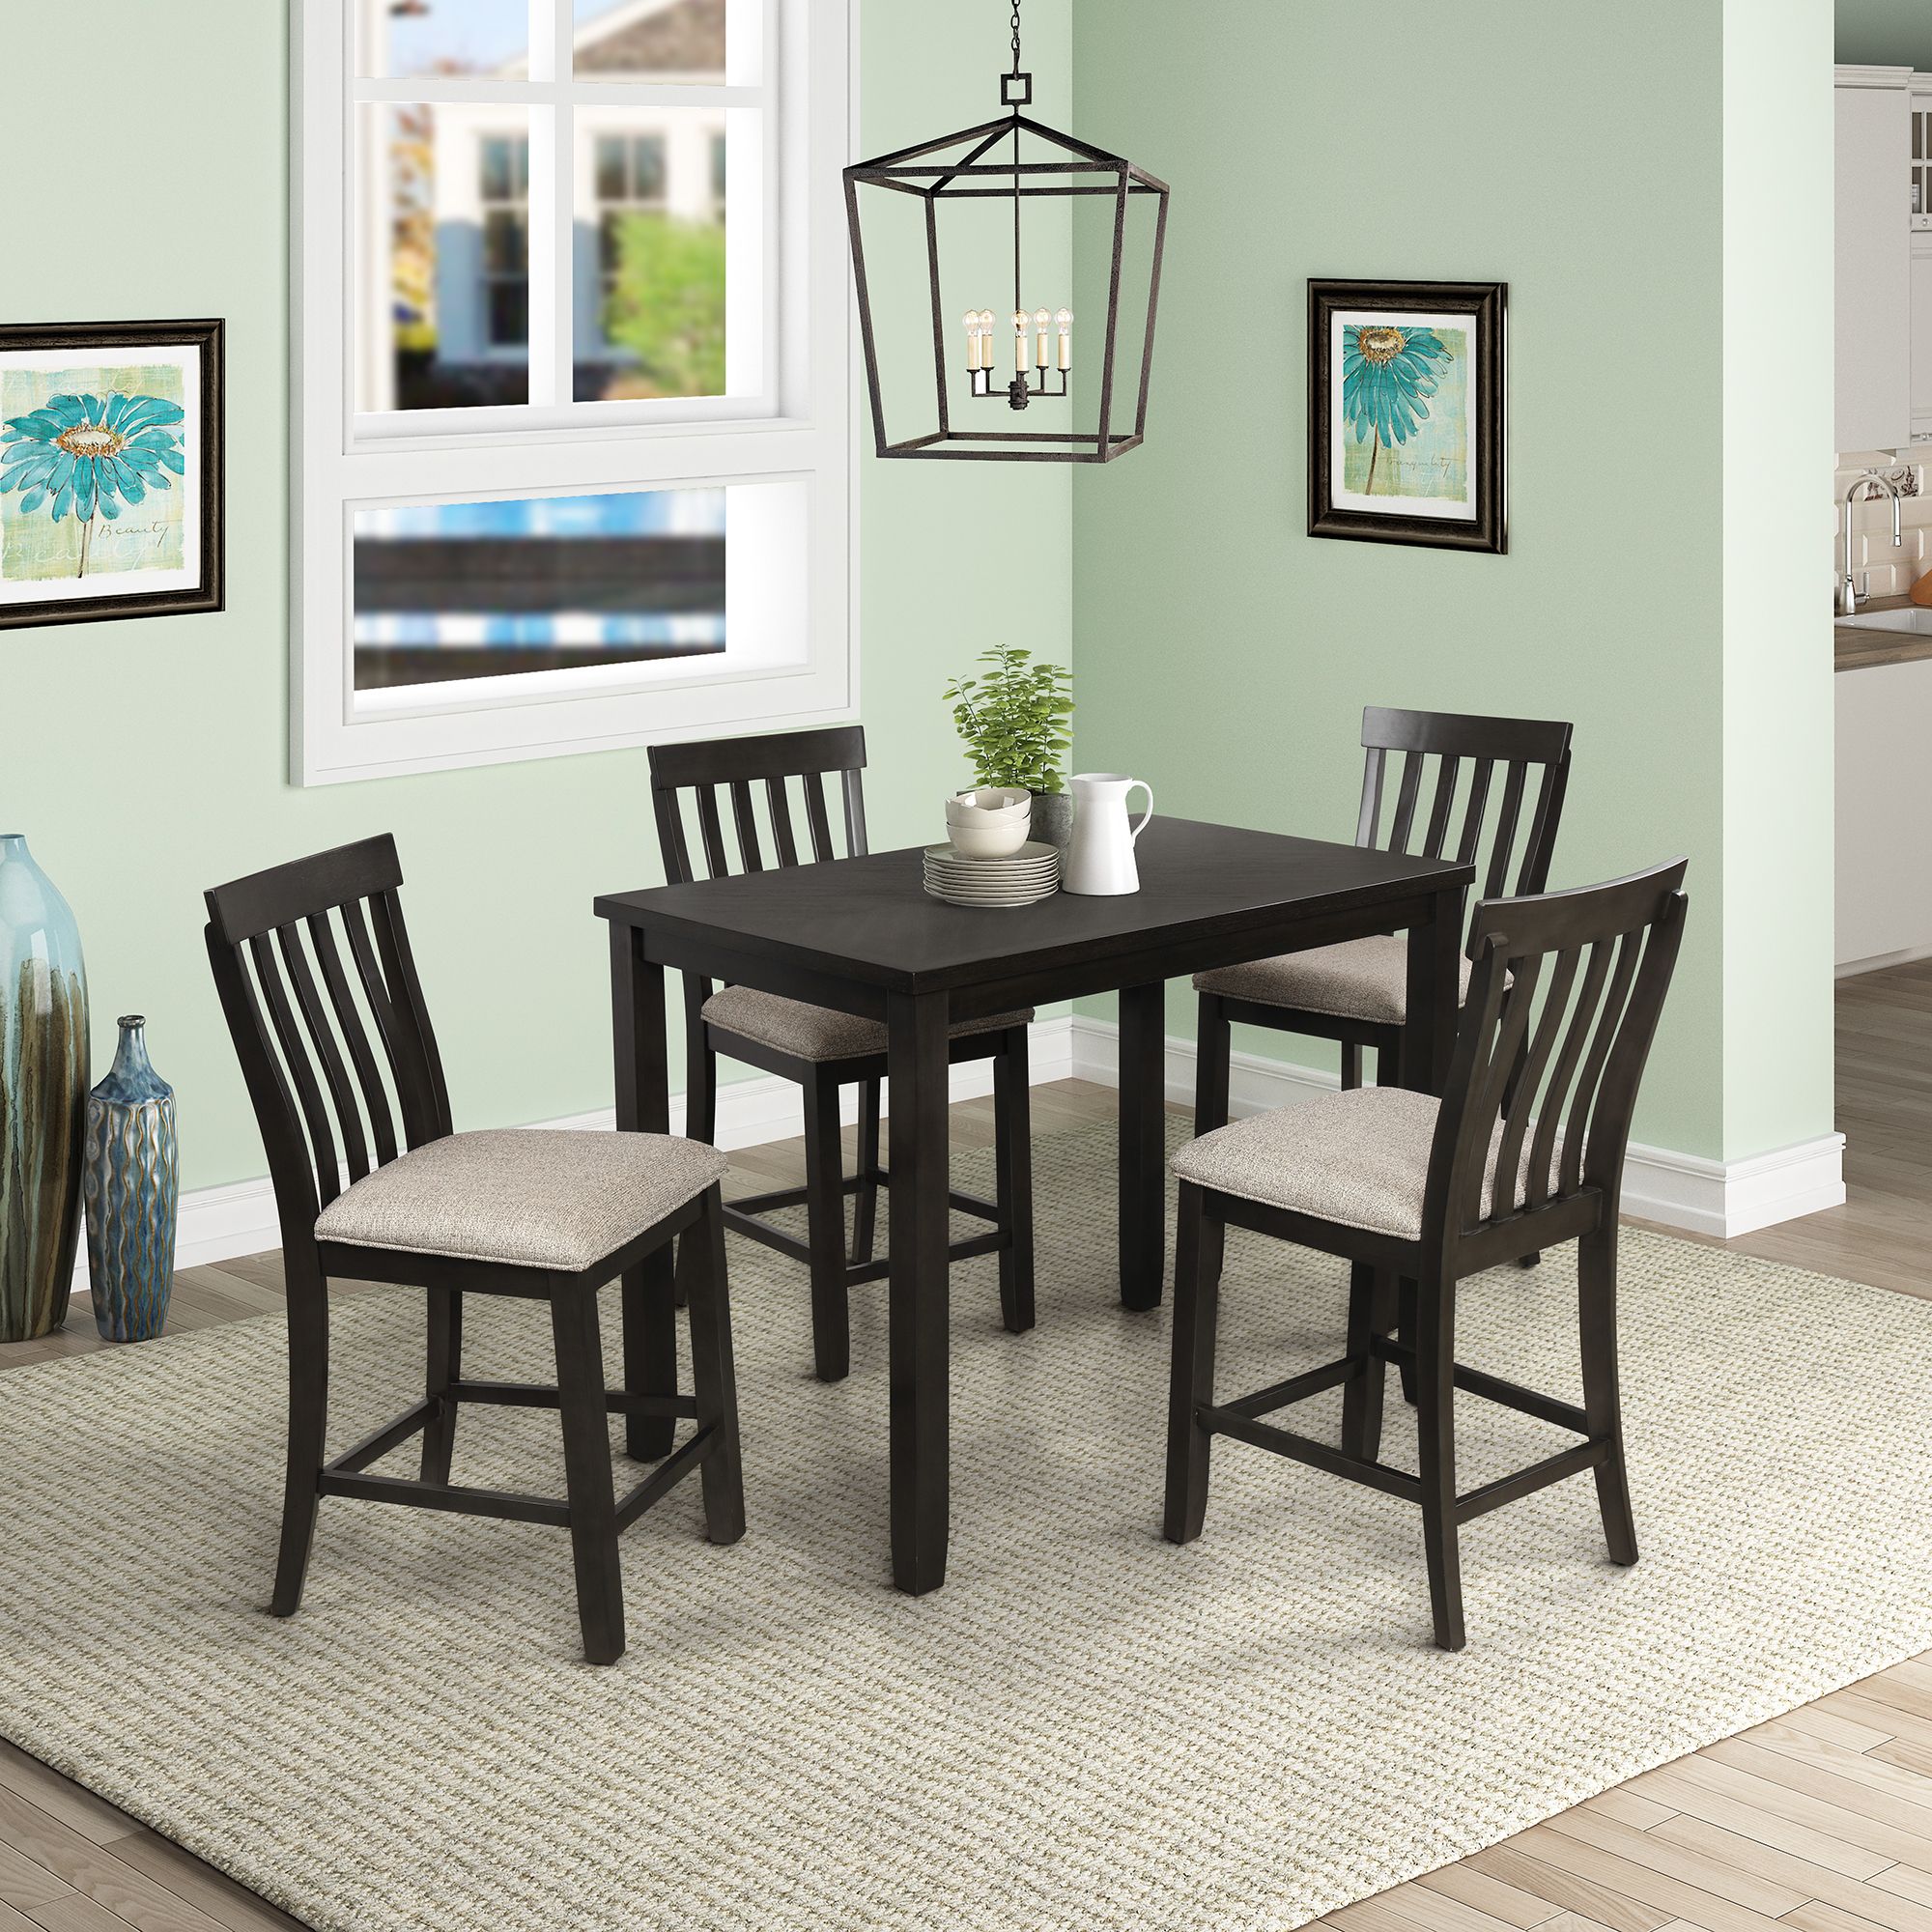 5 Pieces Counter Height Dining Table Set, Rectangular Wood Inside Most Recently Released Natural Rectangle Dining Tables (View 5 of 15)